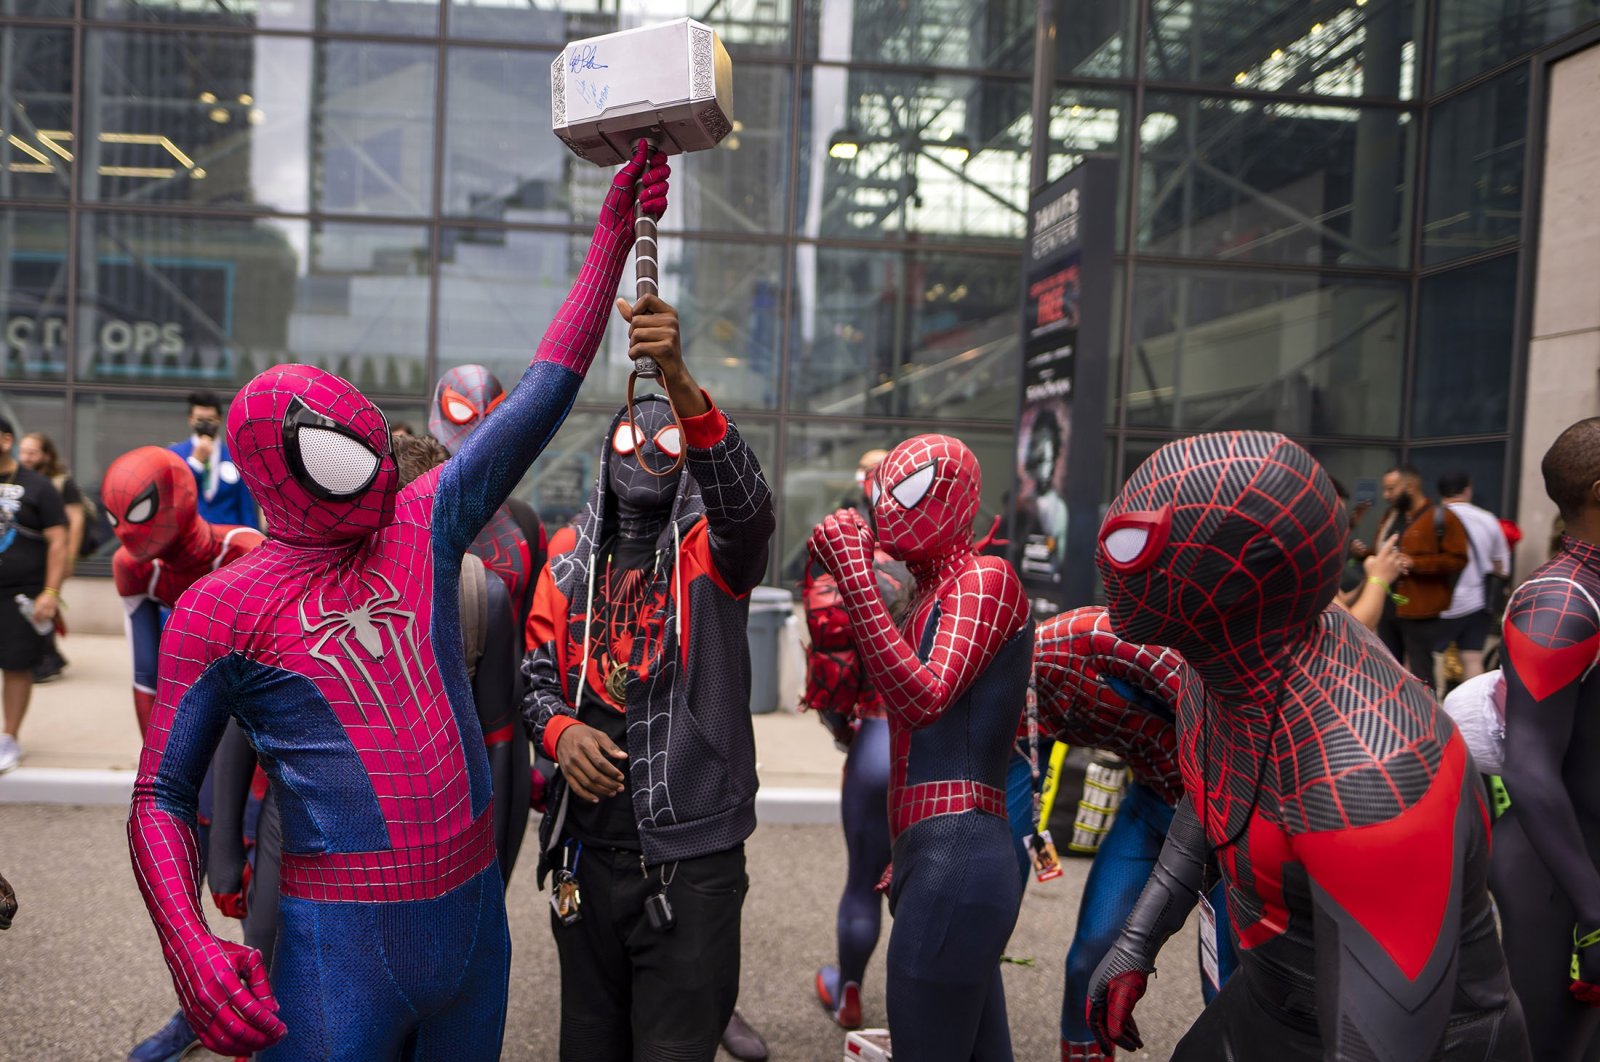 Attendees dressed as Spider-Man gather during New York Comic Con at the Jacob K. Javits Convention Center in New York, U.S., Oct. 9, 2021. (AP Photo)